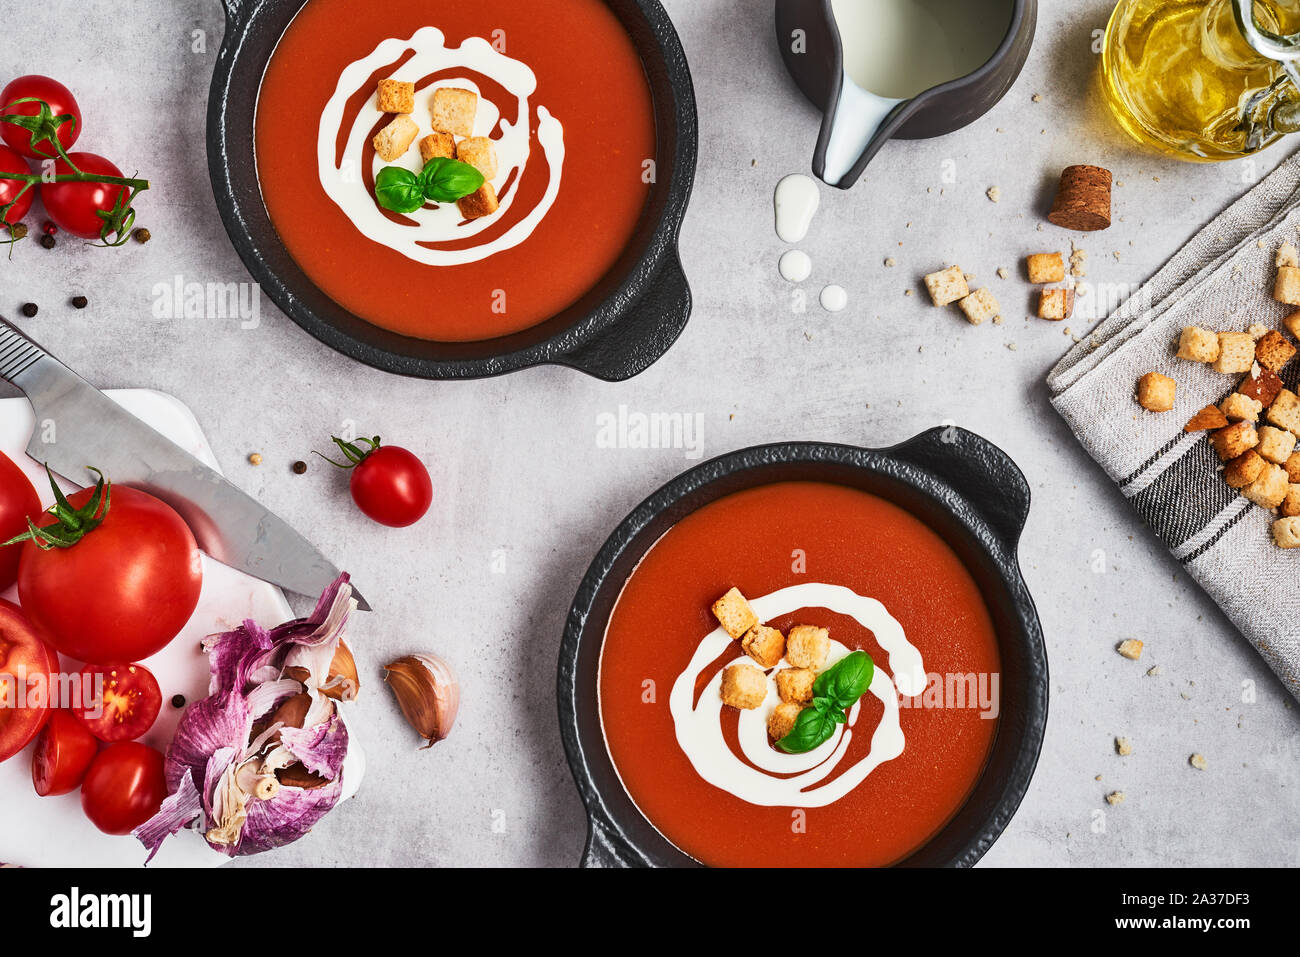 Tomato soup with cream, croutons and basil in a black bowl on stone background. Top view. Copy space for text. Stock Photo